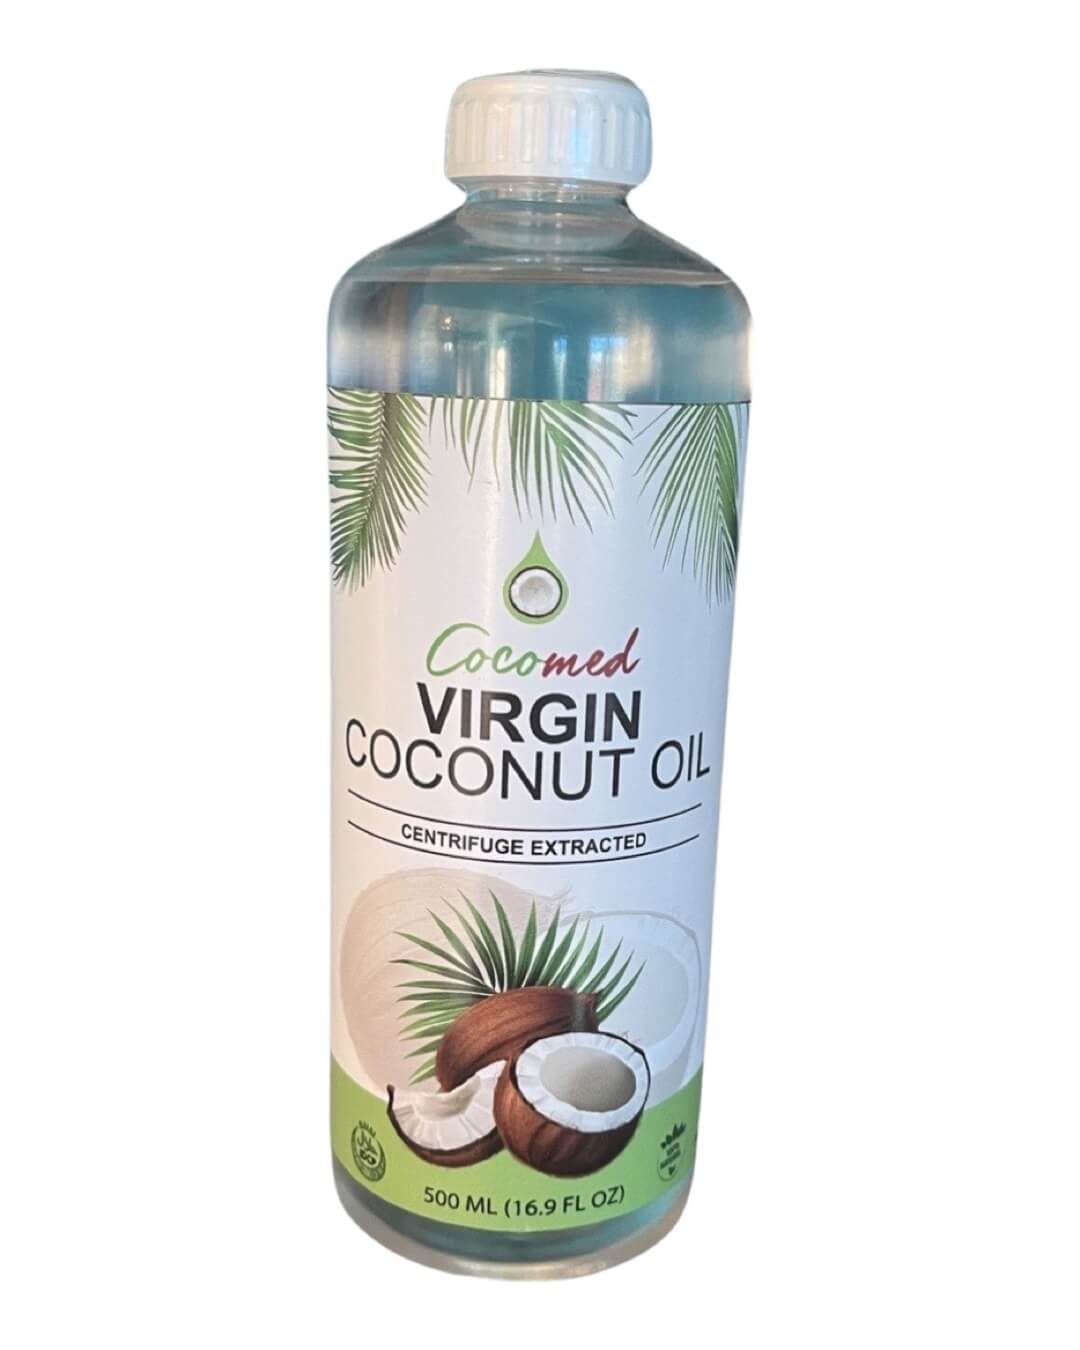 Cocomed Virgin Coconut Oil Centrifuge Extracted  500mL